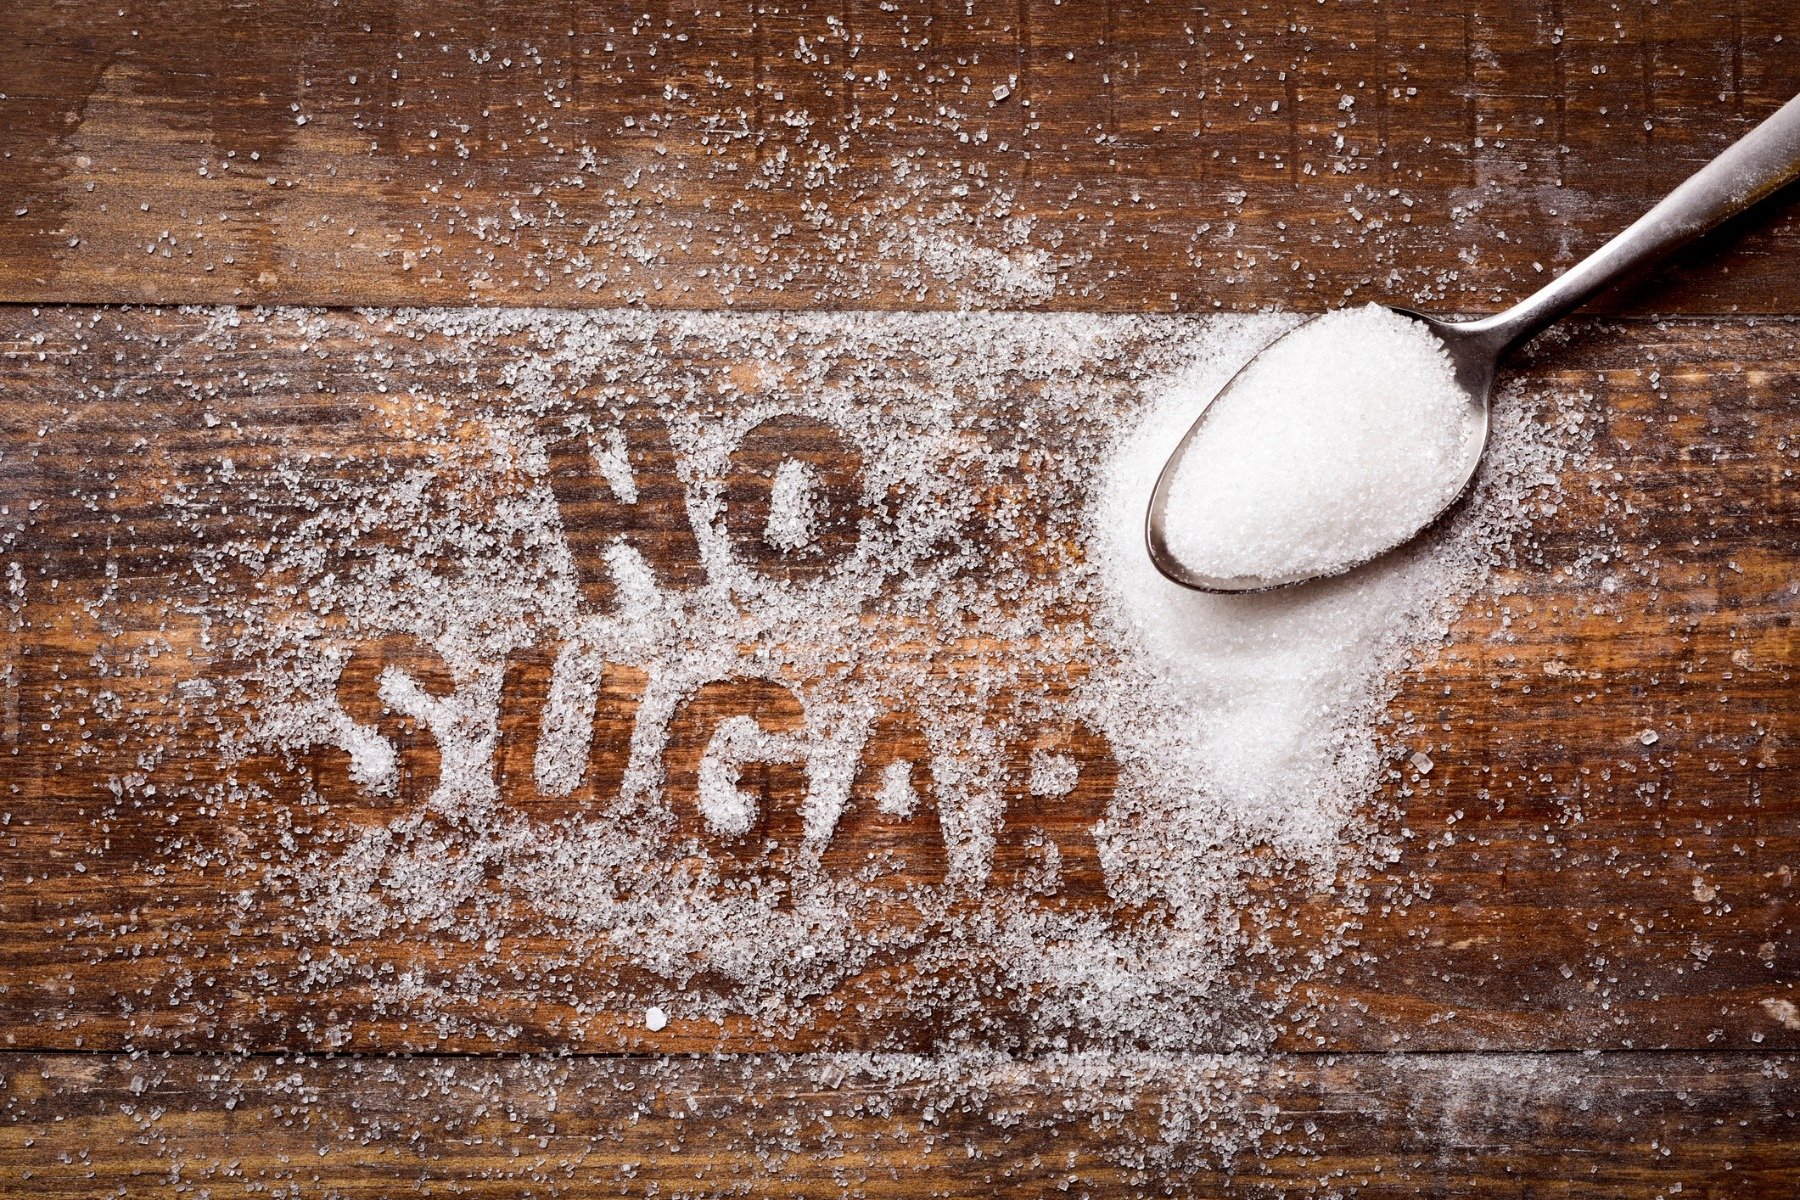 Sucralose - artificial sweetener and its impact on health